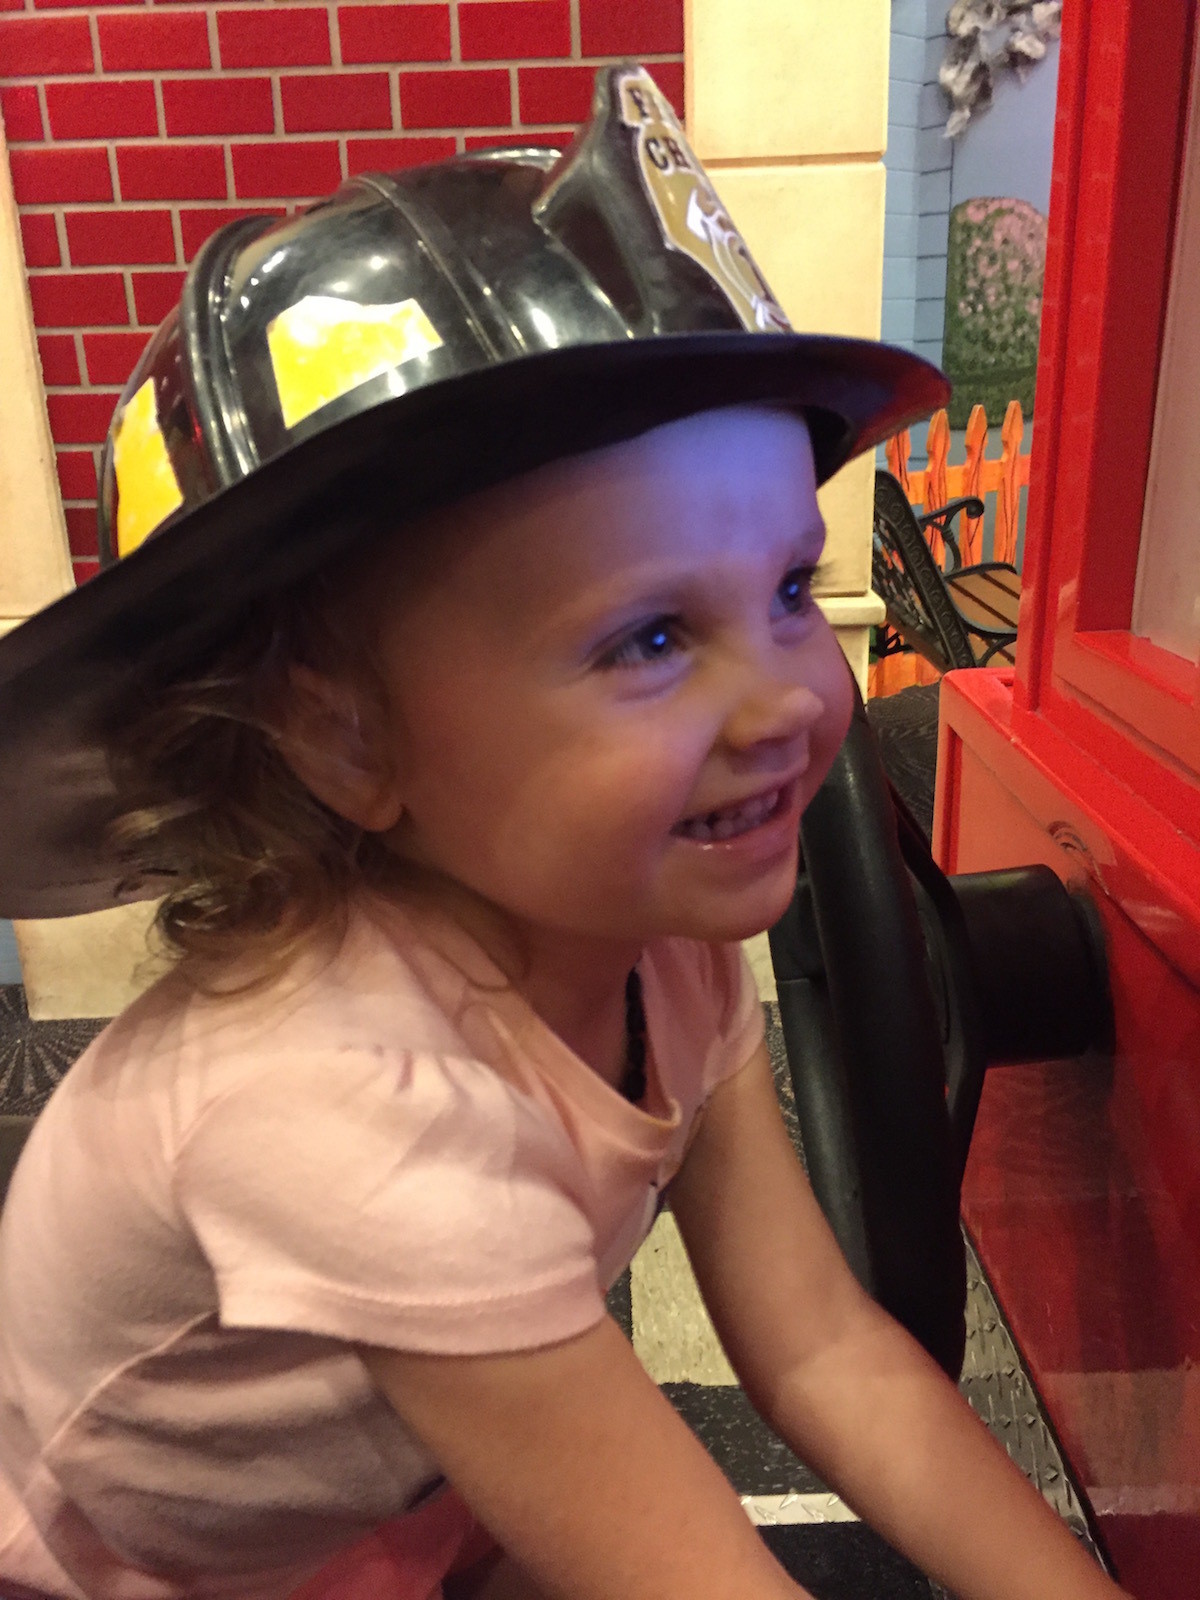 Ellie’s love for Great Explorations (and its fire truck)